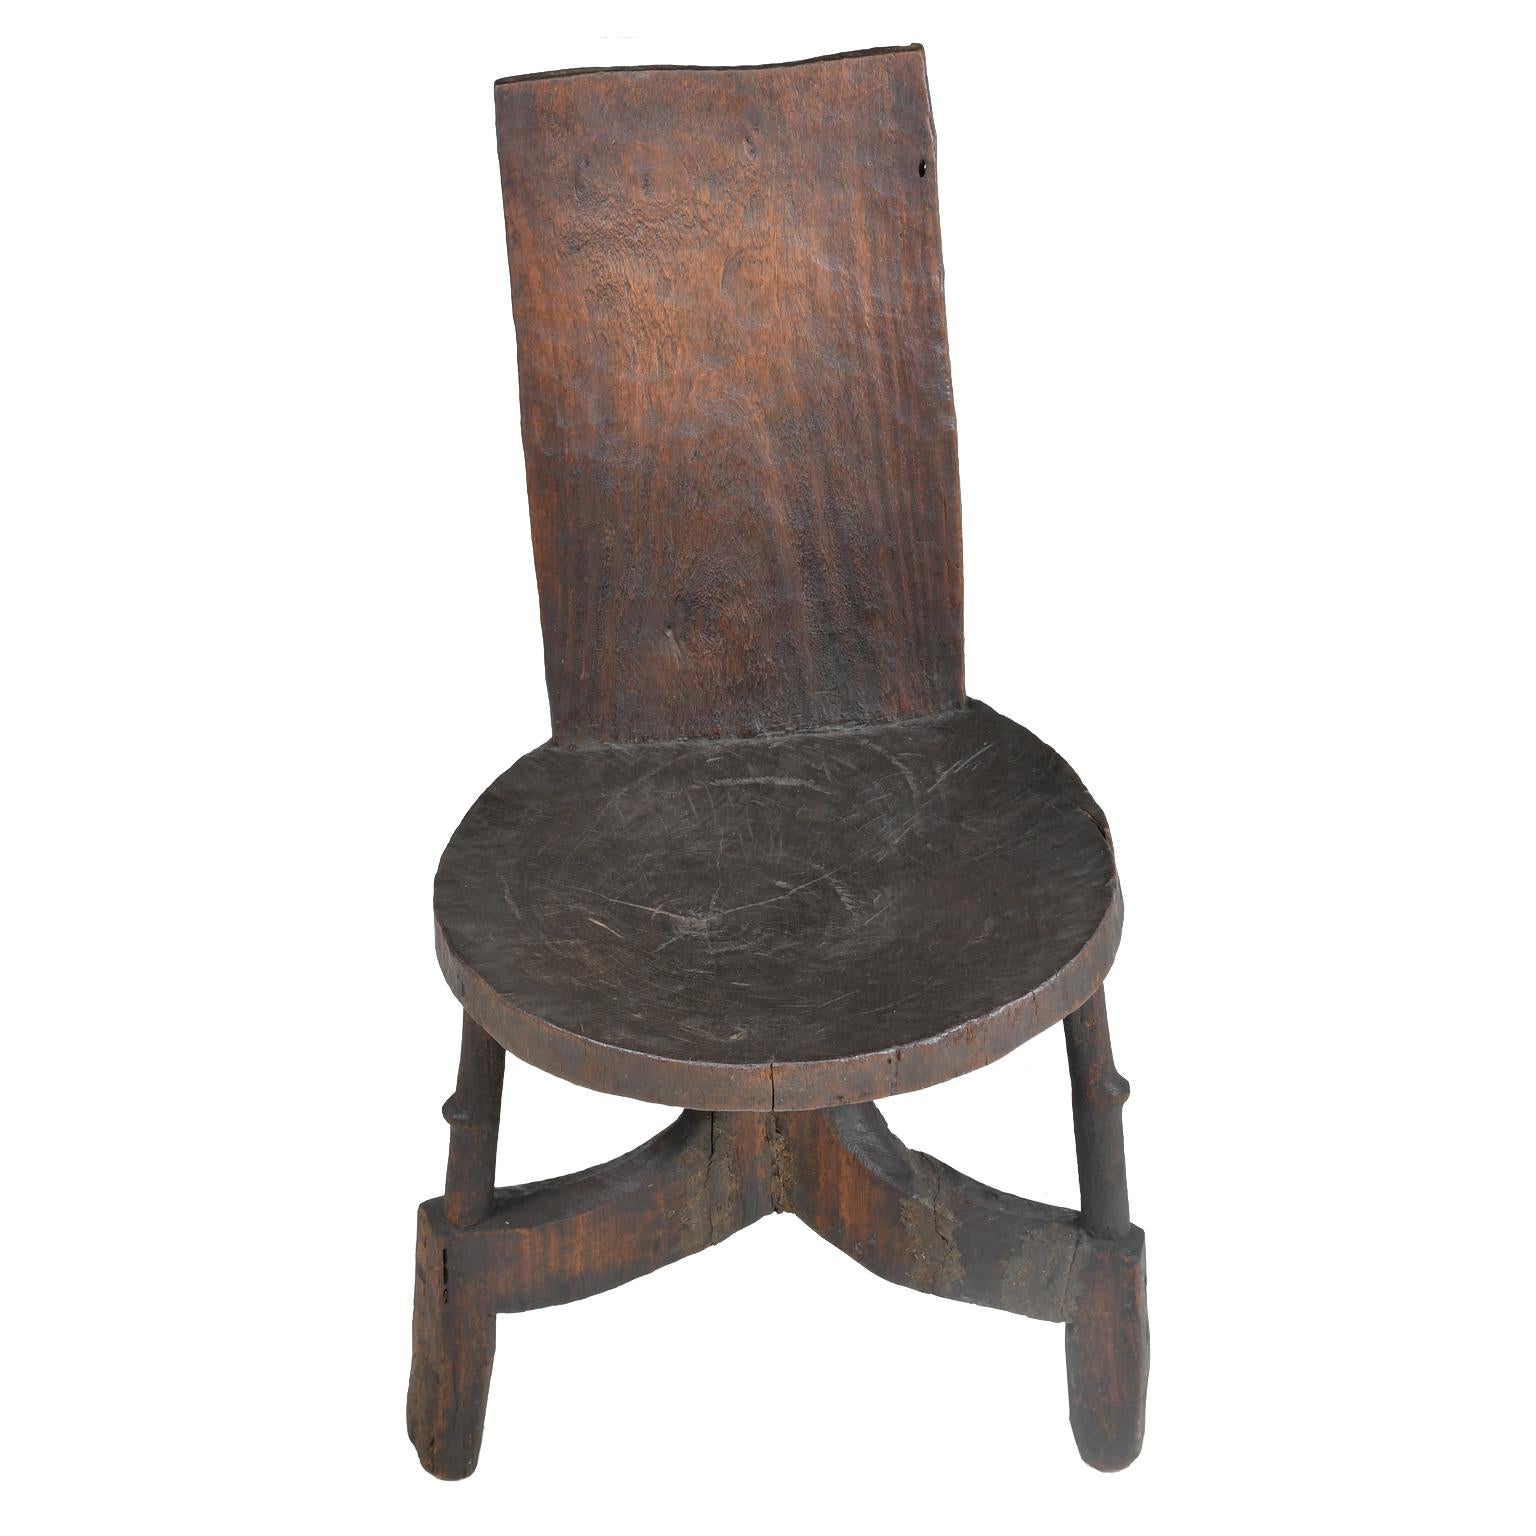 An early 20th century African chieftain chair from the Oromo people in the eastern part of Ethiopia. The Oromo chairs and seats are all identifiable by their distinctive style, with three outwardly curved round legs, a round carved seat and a high